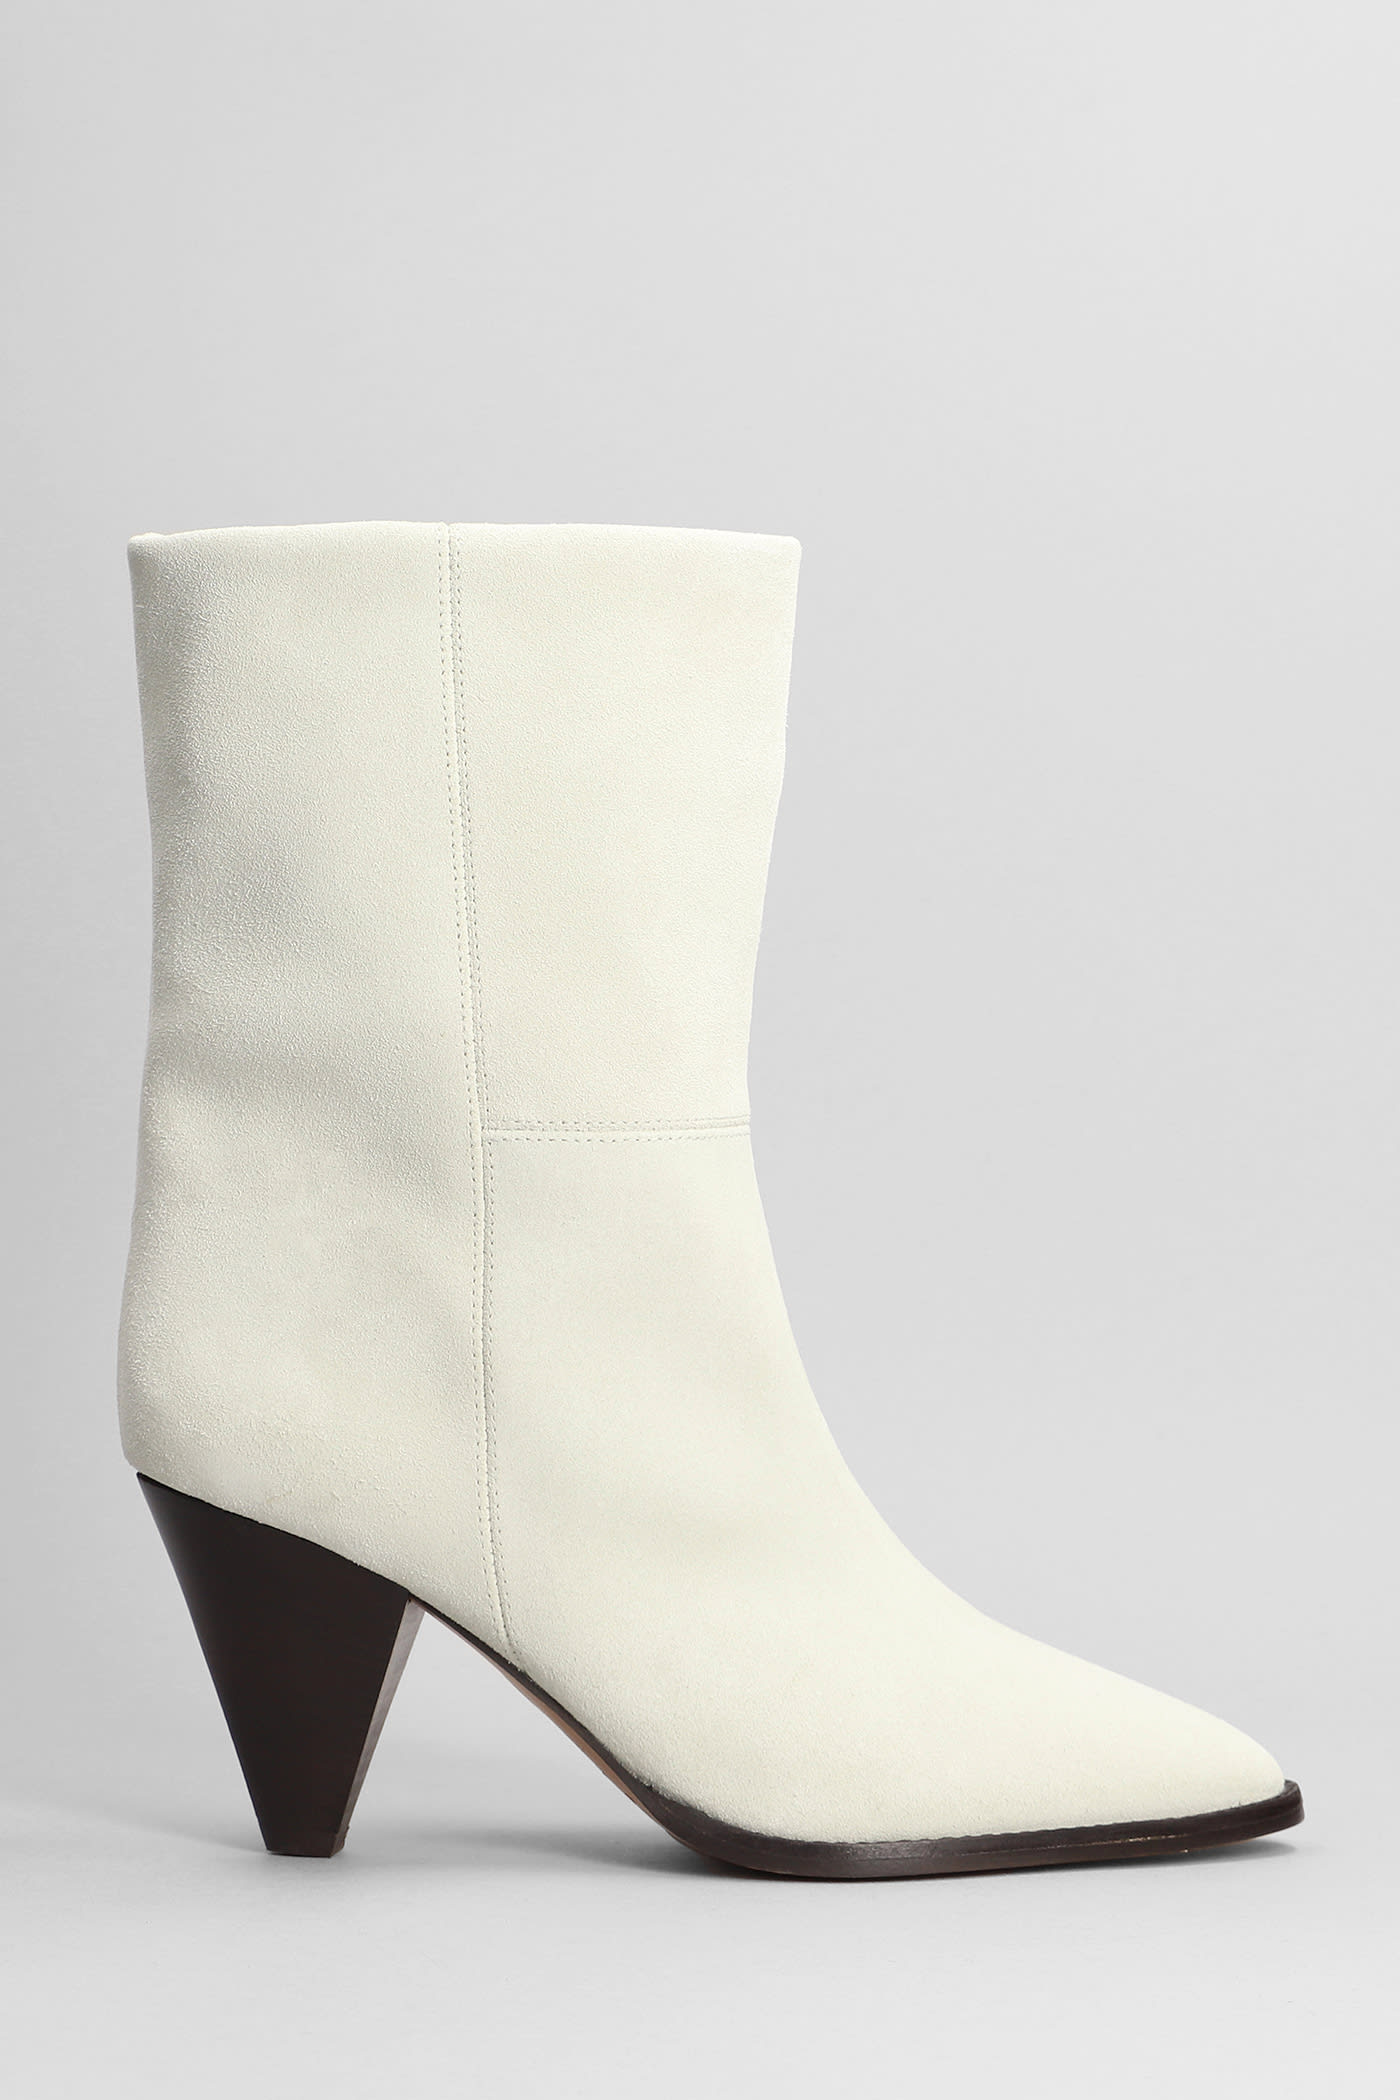 ISABEL MARANT ROUXA HIGH HEELS ANKLE BOOTS IN BEIGE SUEDE